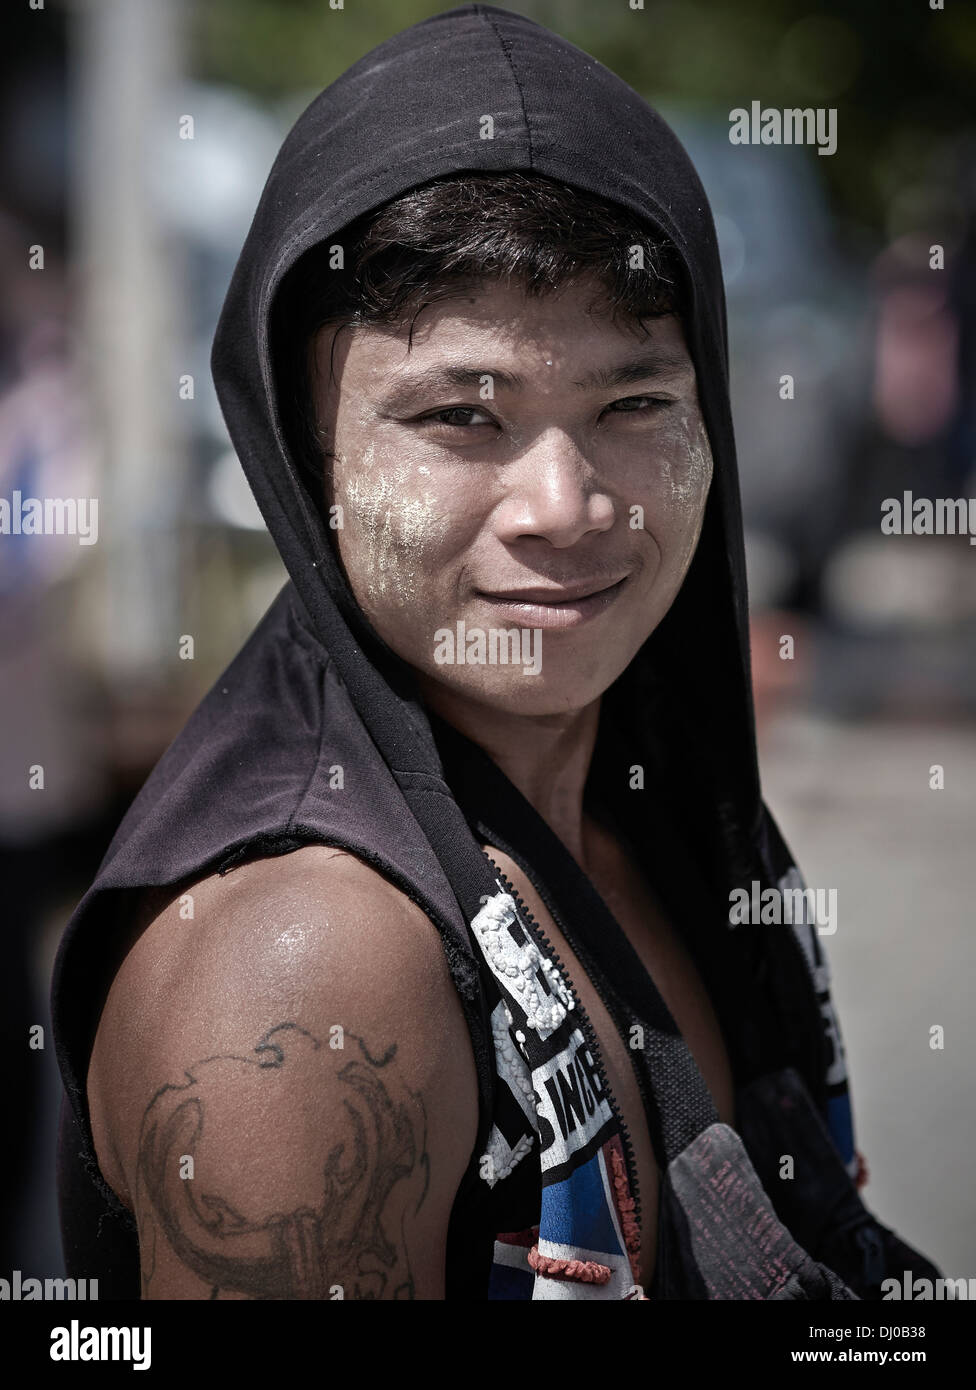 Portrait of a Thai male wearing a hoodie and sporting an arm tattoo. Thailand S. E. Asia Stock Photo